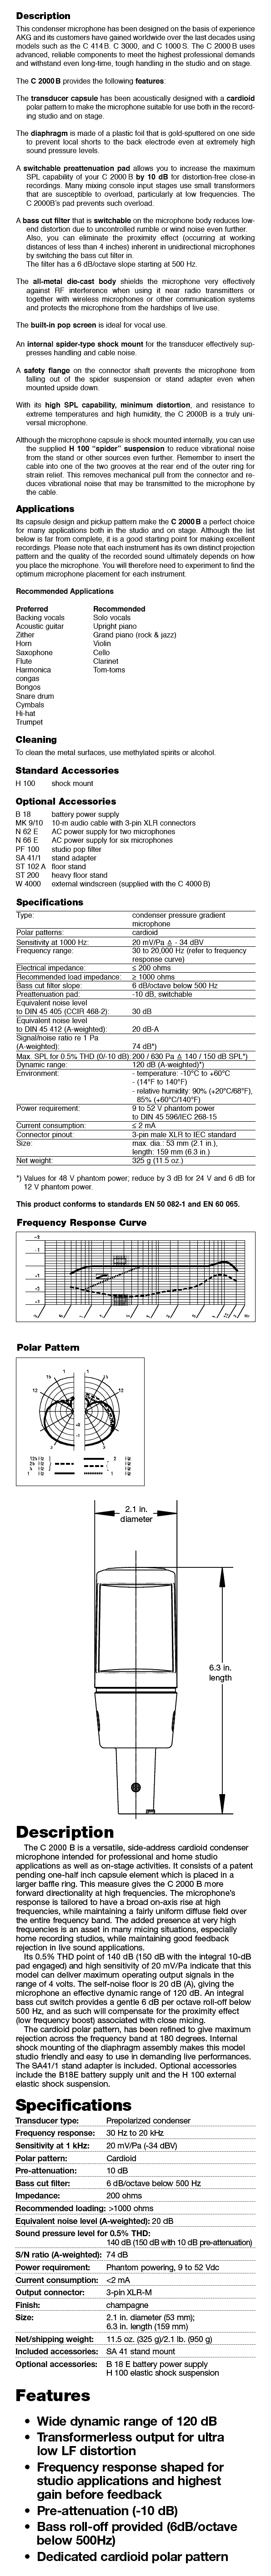 AKG C 2000 B specifications